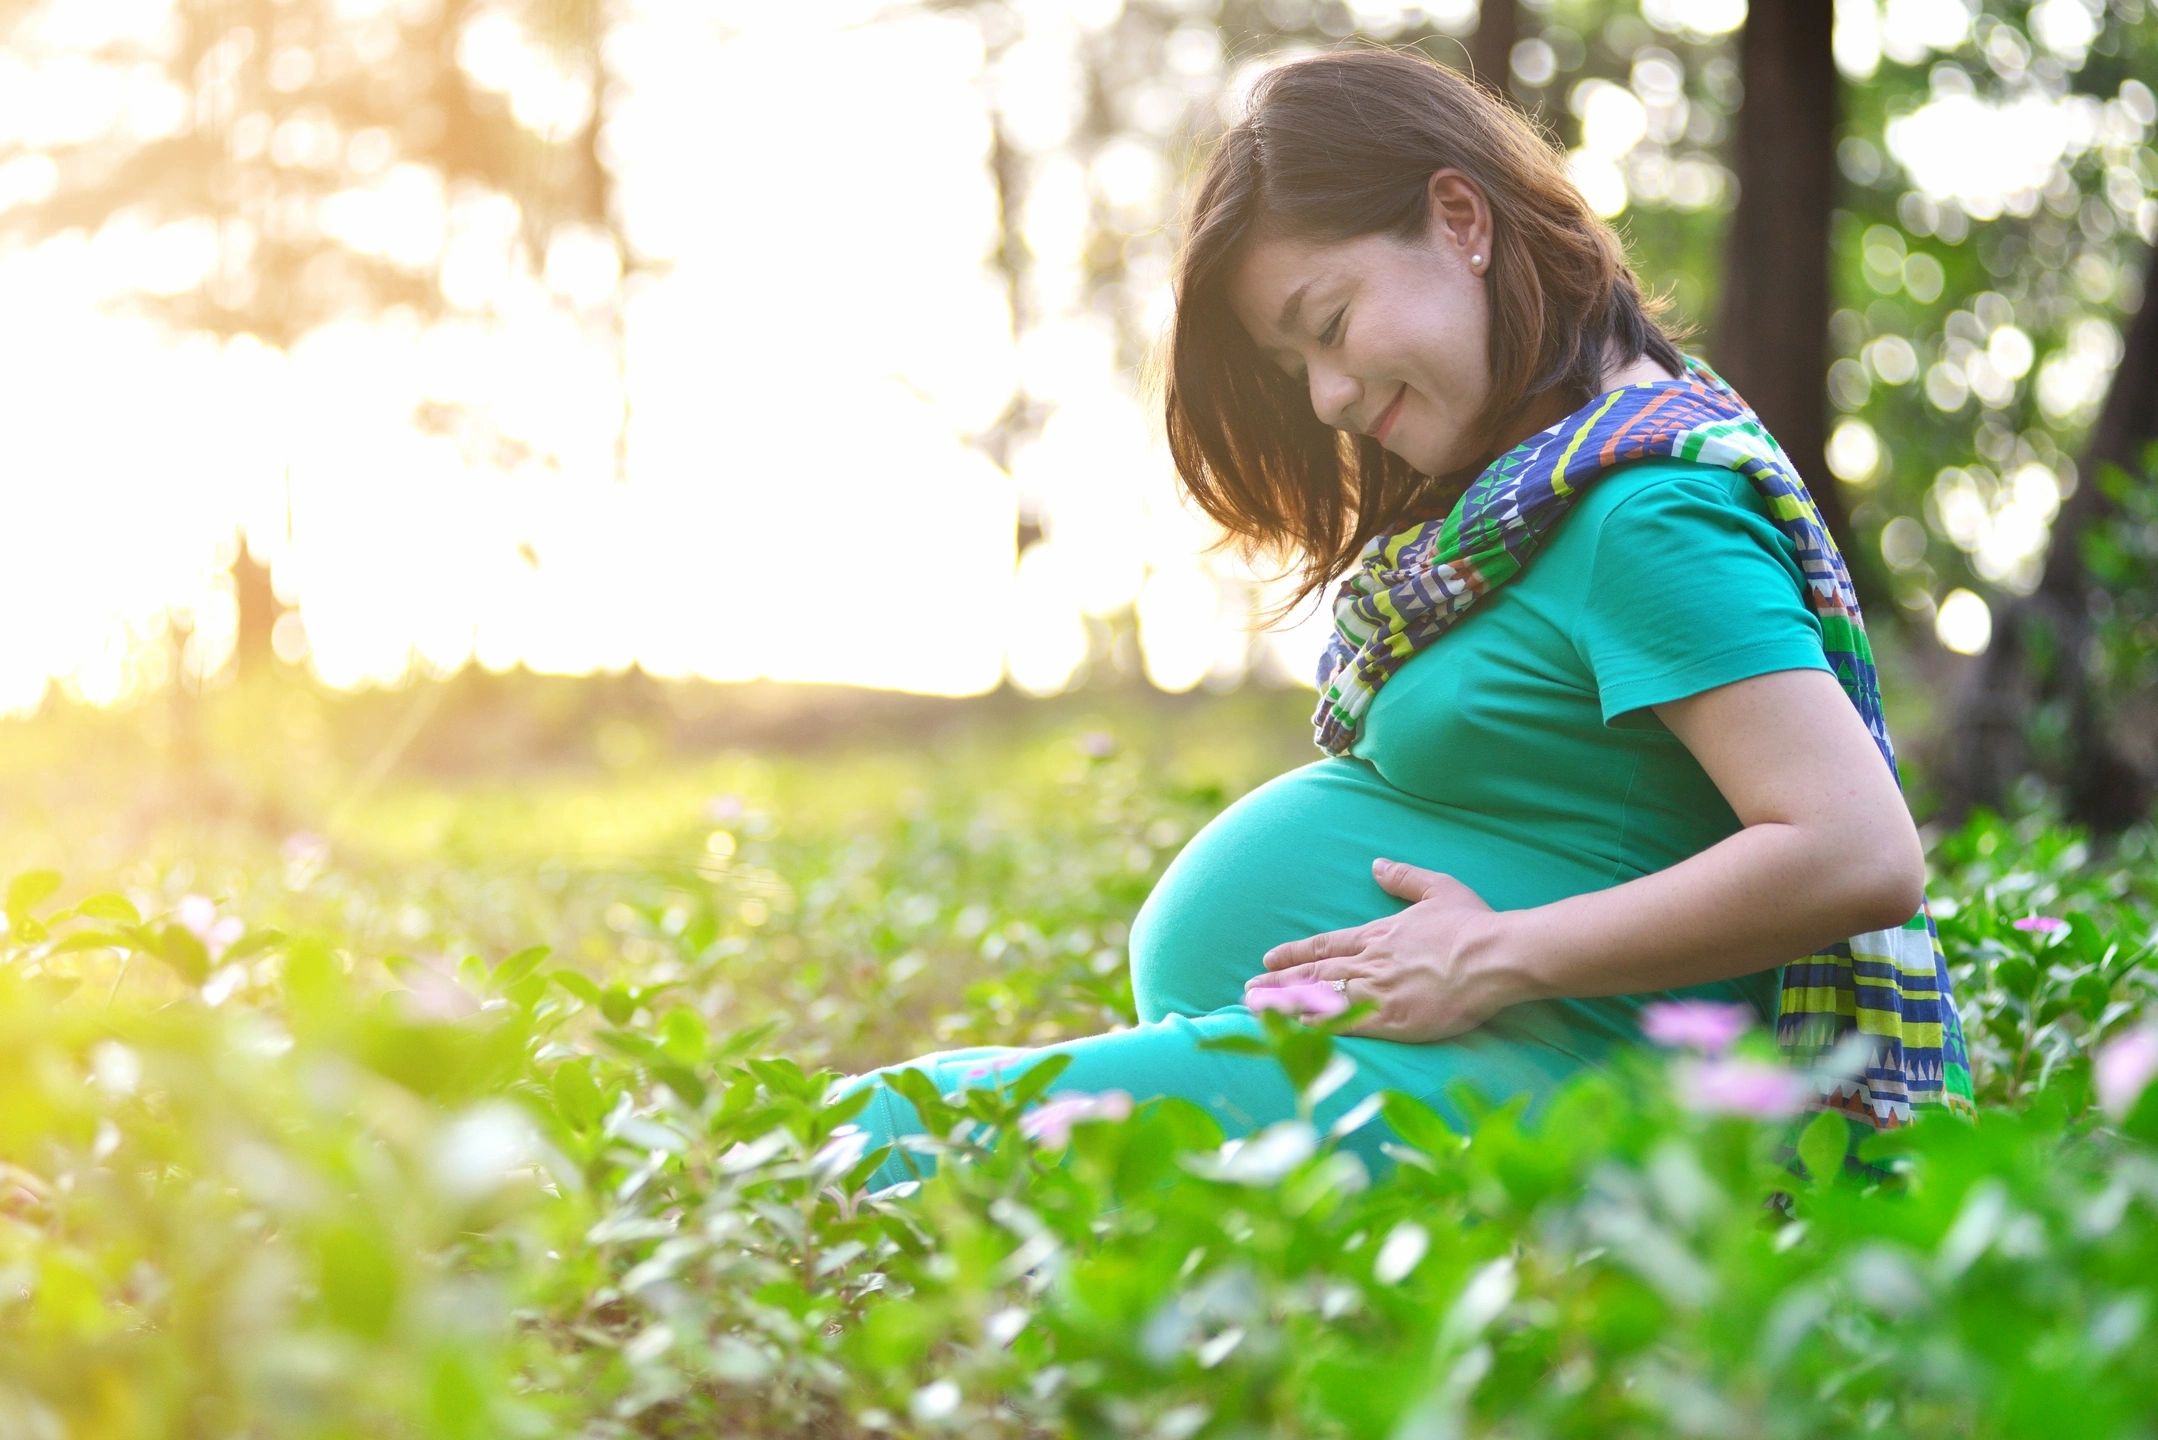 Getting Pregnant After 40: 10 Tips to Increase Your Fertility Naturally